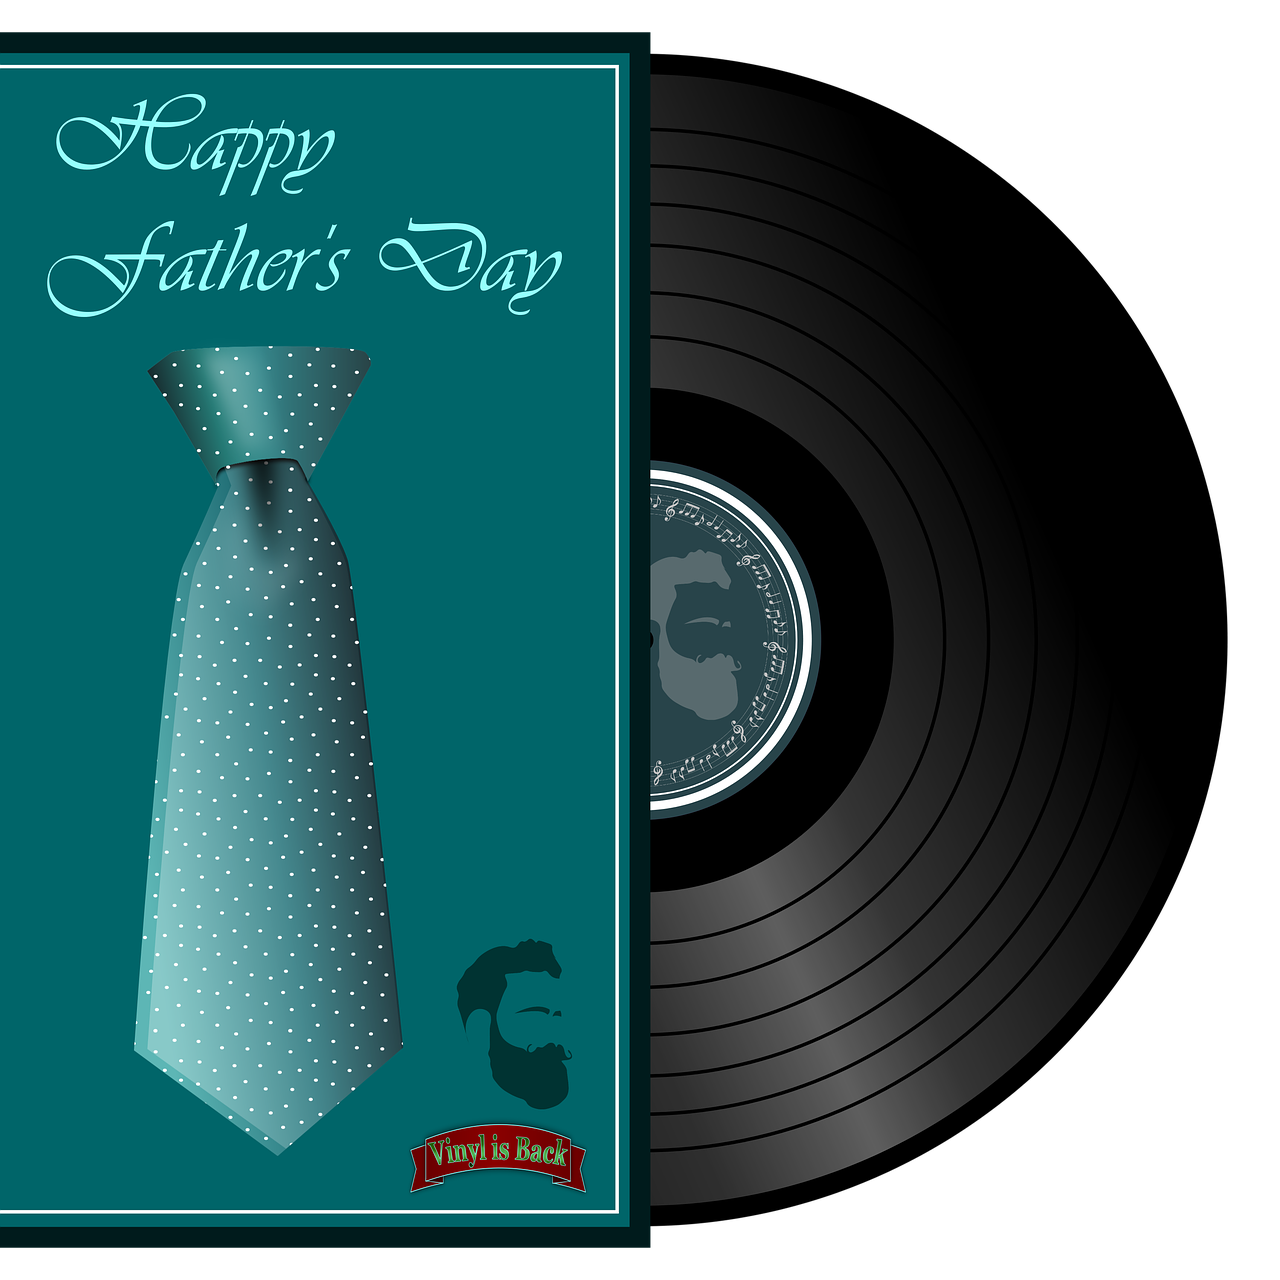 father's day  vinyl  music free photo